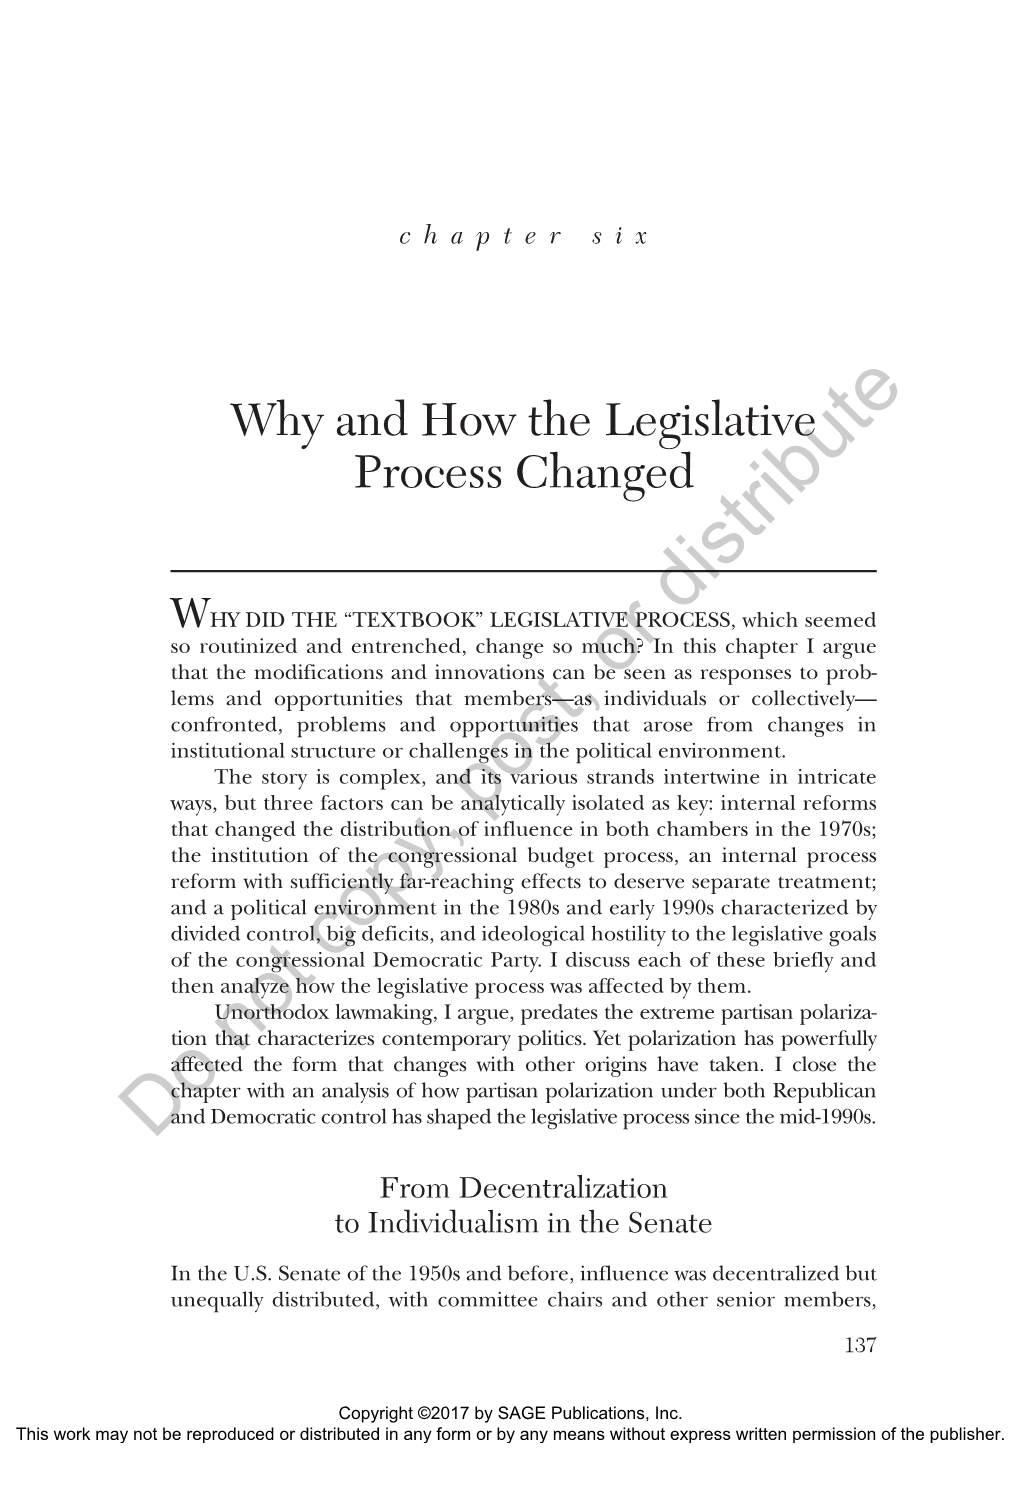 Why and How the Legislative Process Changed